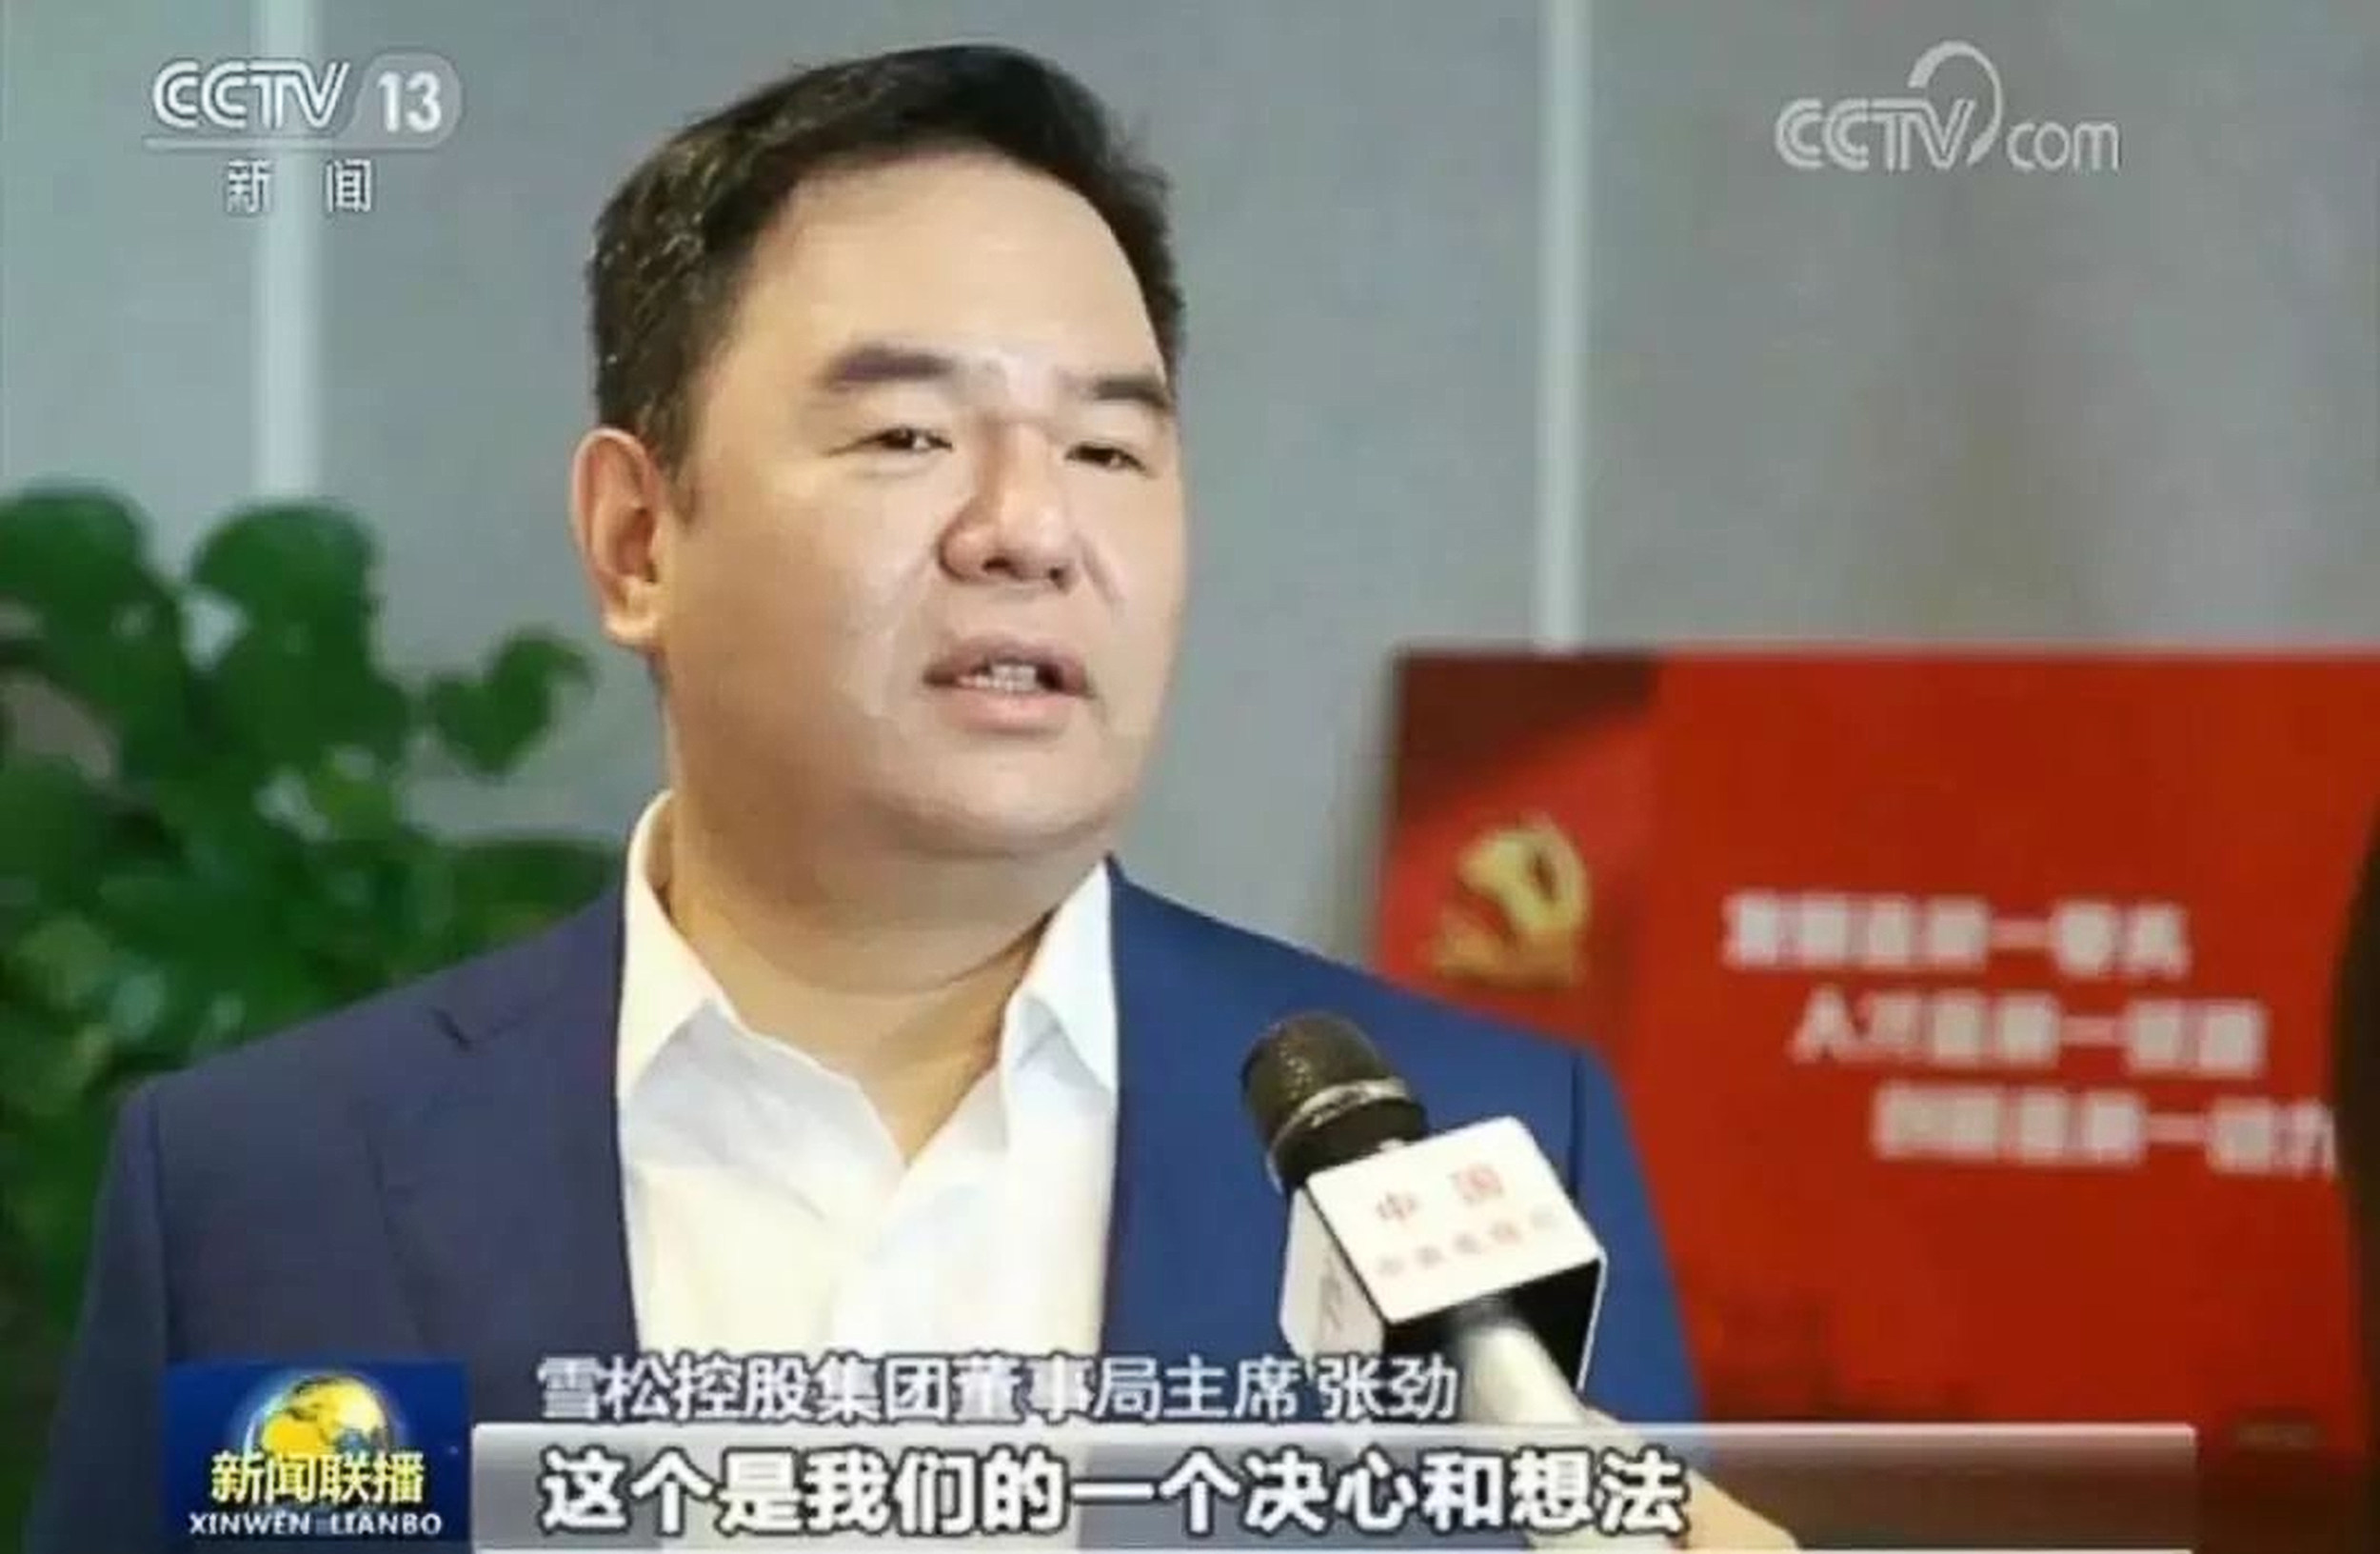 Chinese tycoon Zhang Jin has been detained by police for illegal fundraising. Photo: CCTV